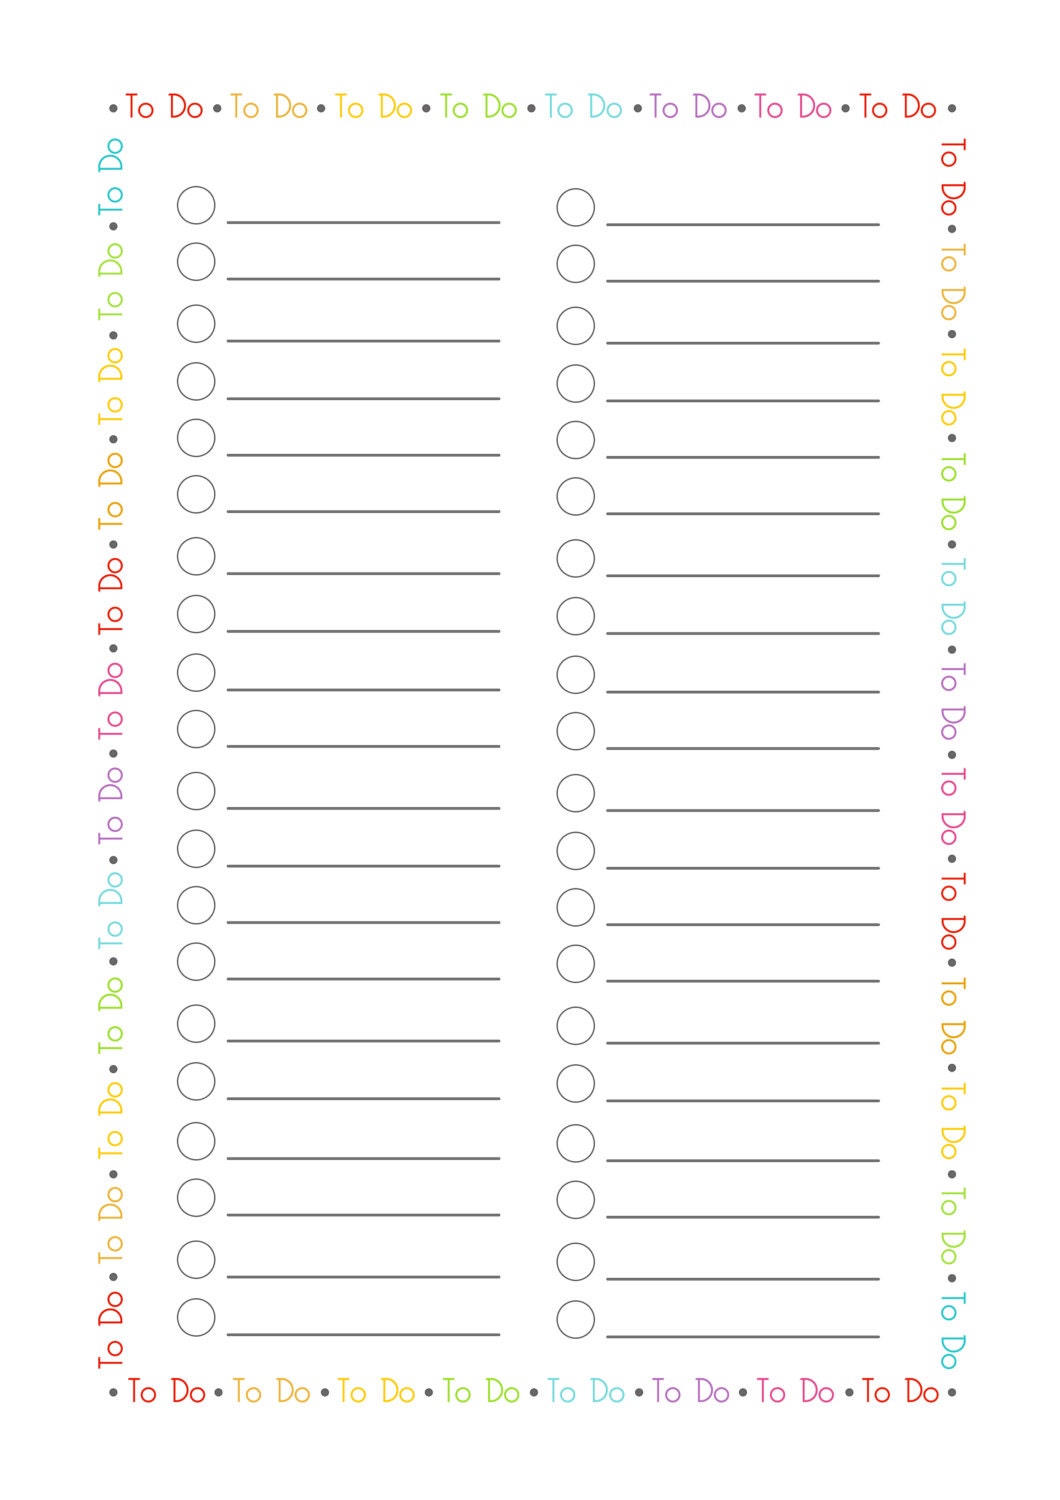 Printable to do list various layouts for planner for